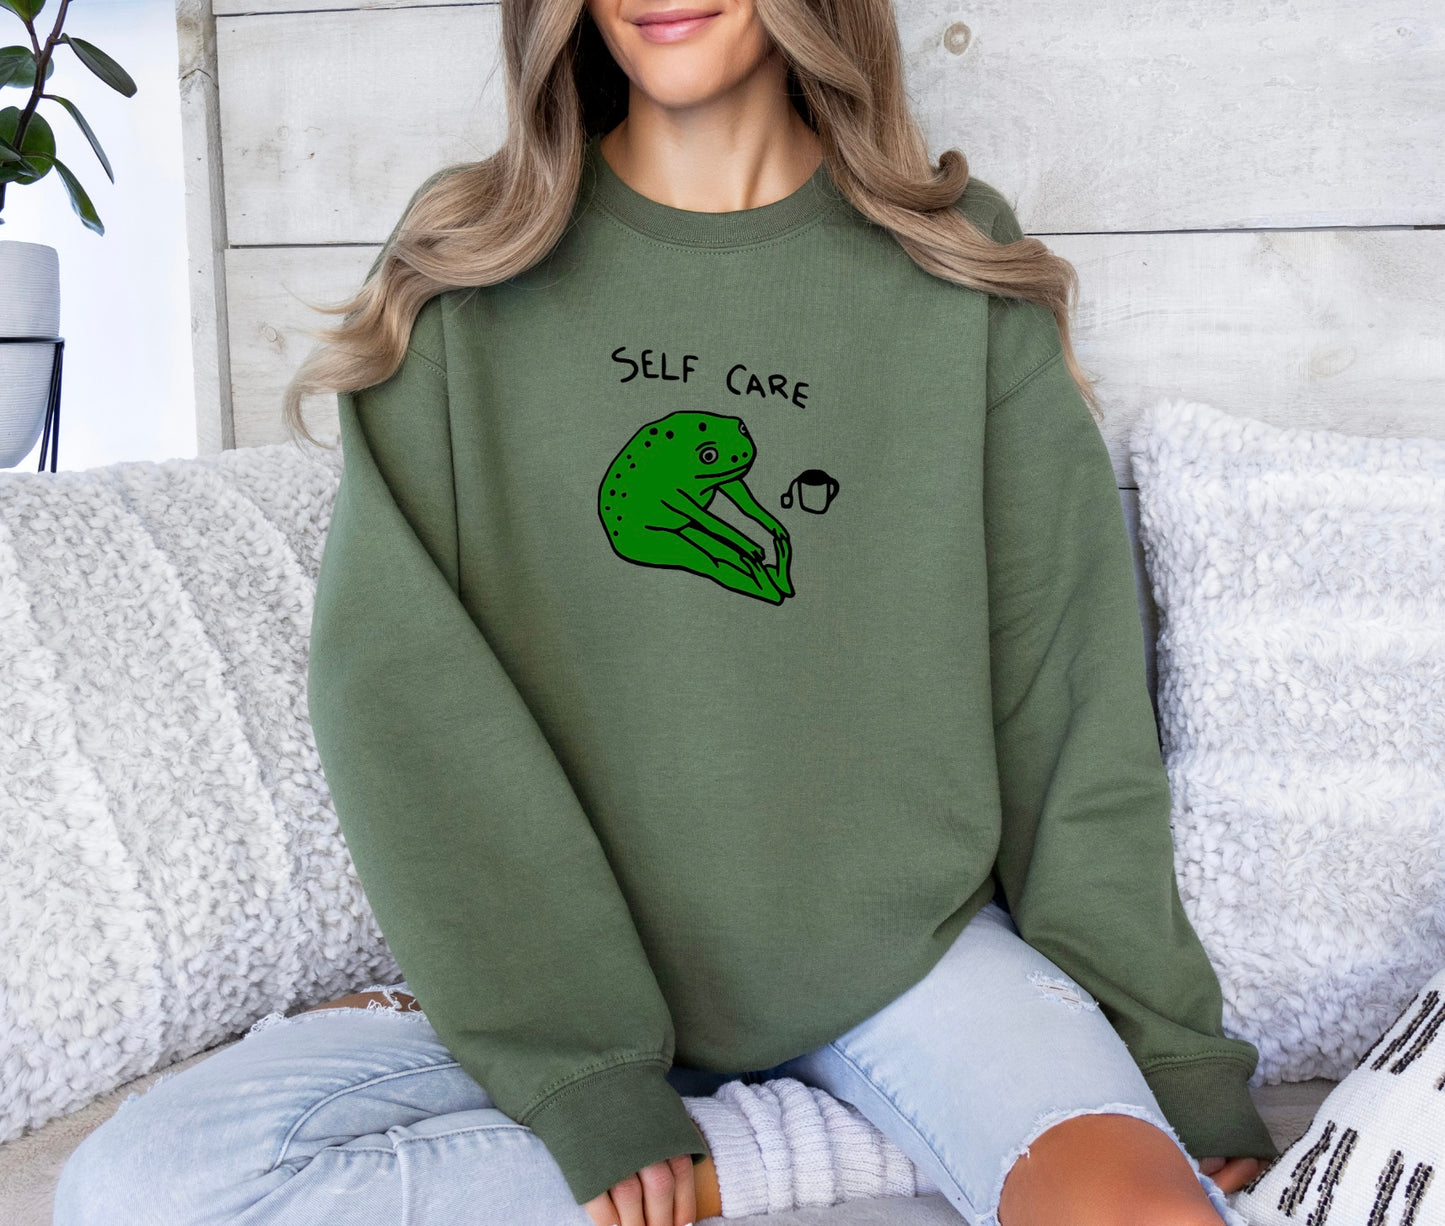 Self Care Shirt, Self Care Sweater, Self Care Sweatshirt, Self Care Hoodie, Frog Shirt, Coffee Shirt, Mental Health Shirt, Anxiety Shirt, Aesthetic Hoodie, Comfy Sweater